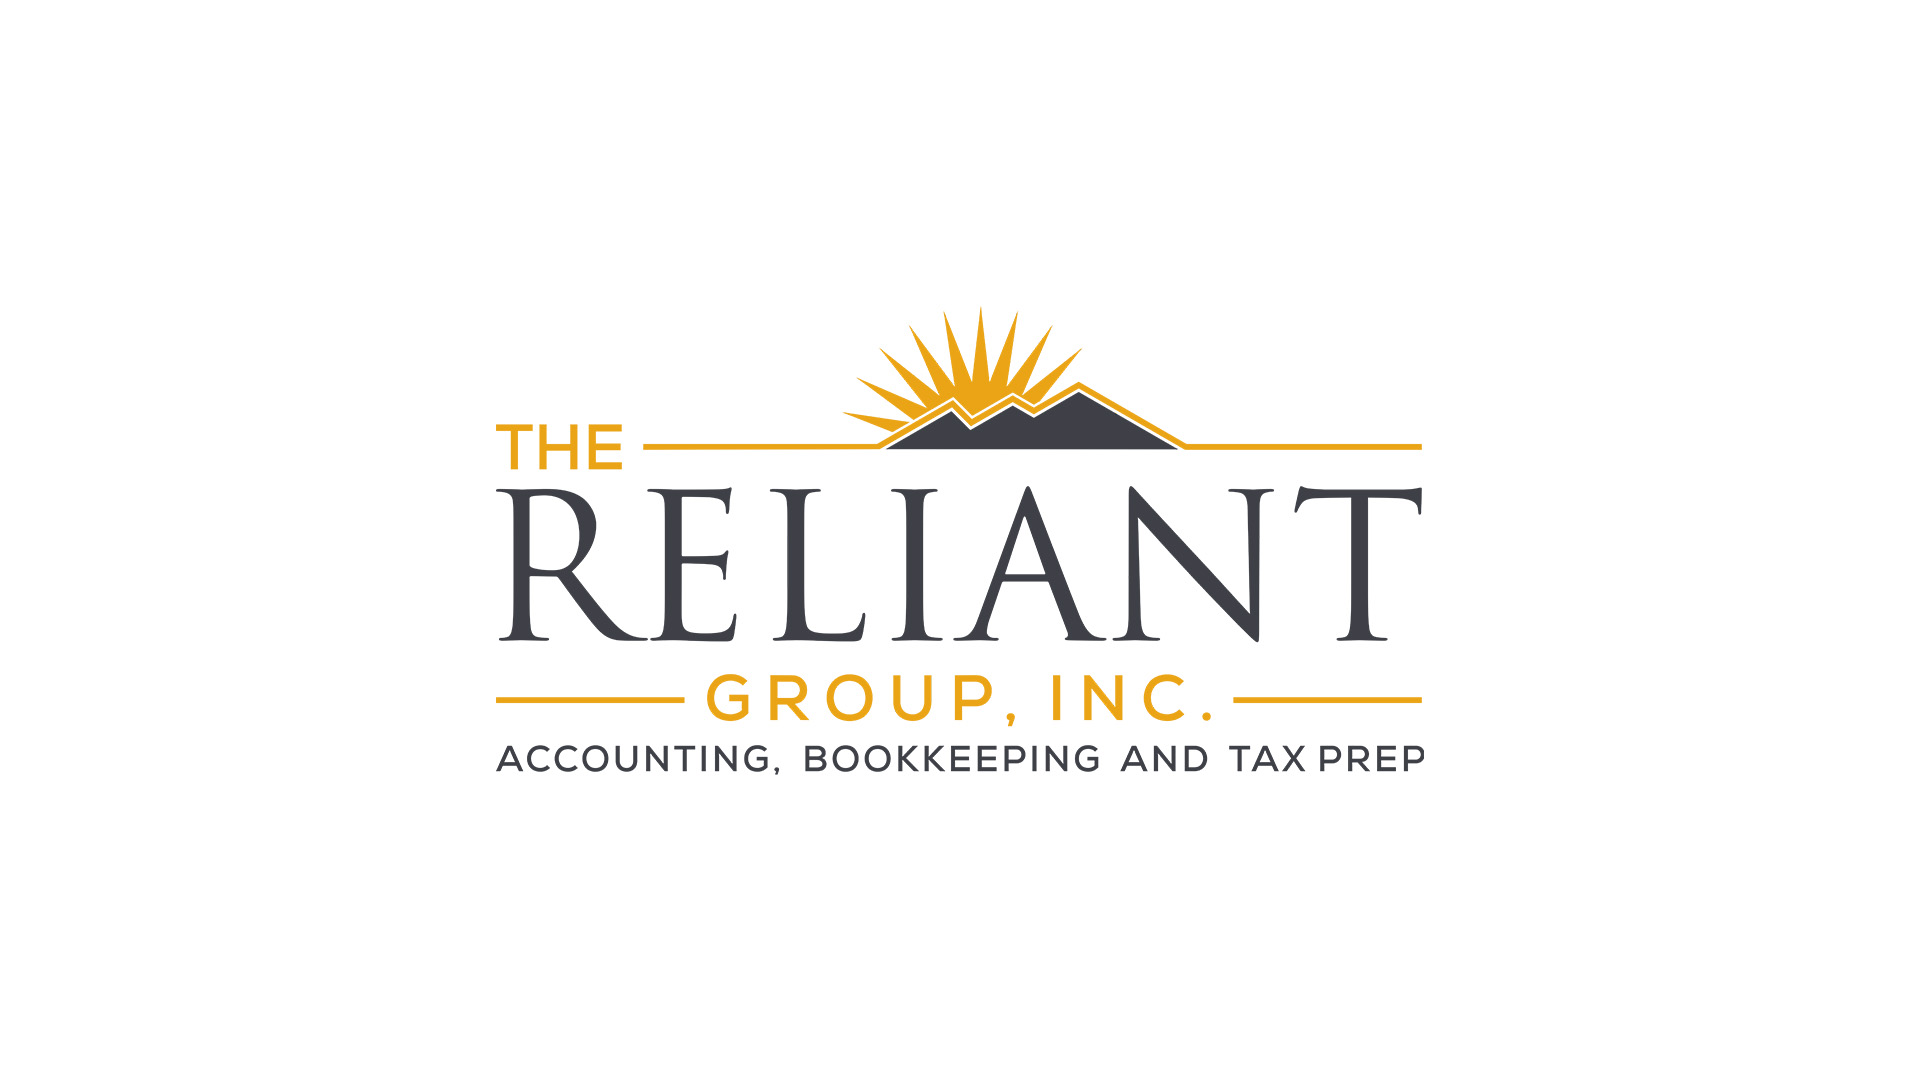 The Reliant Group